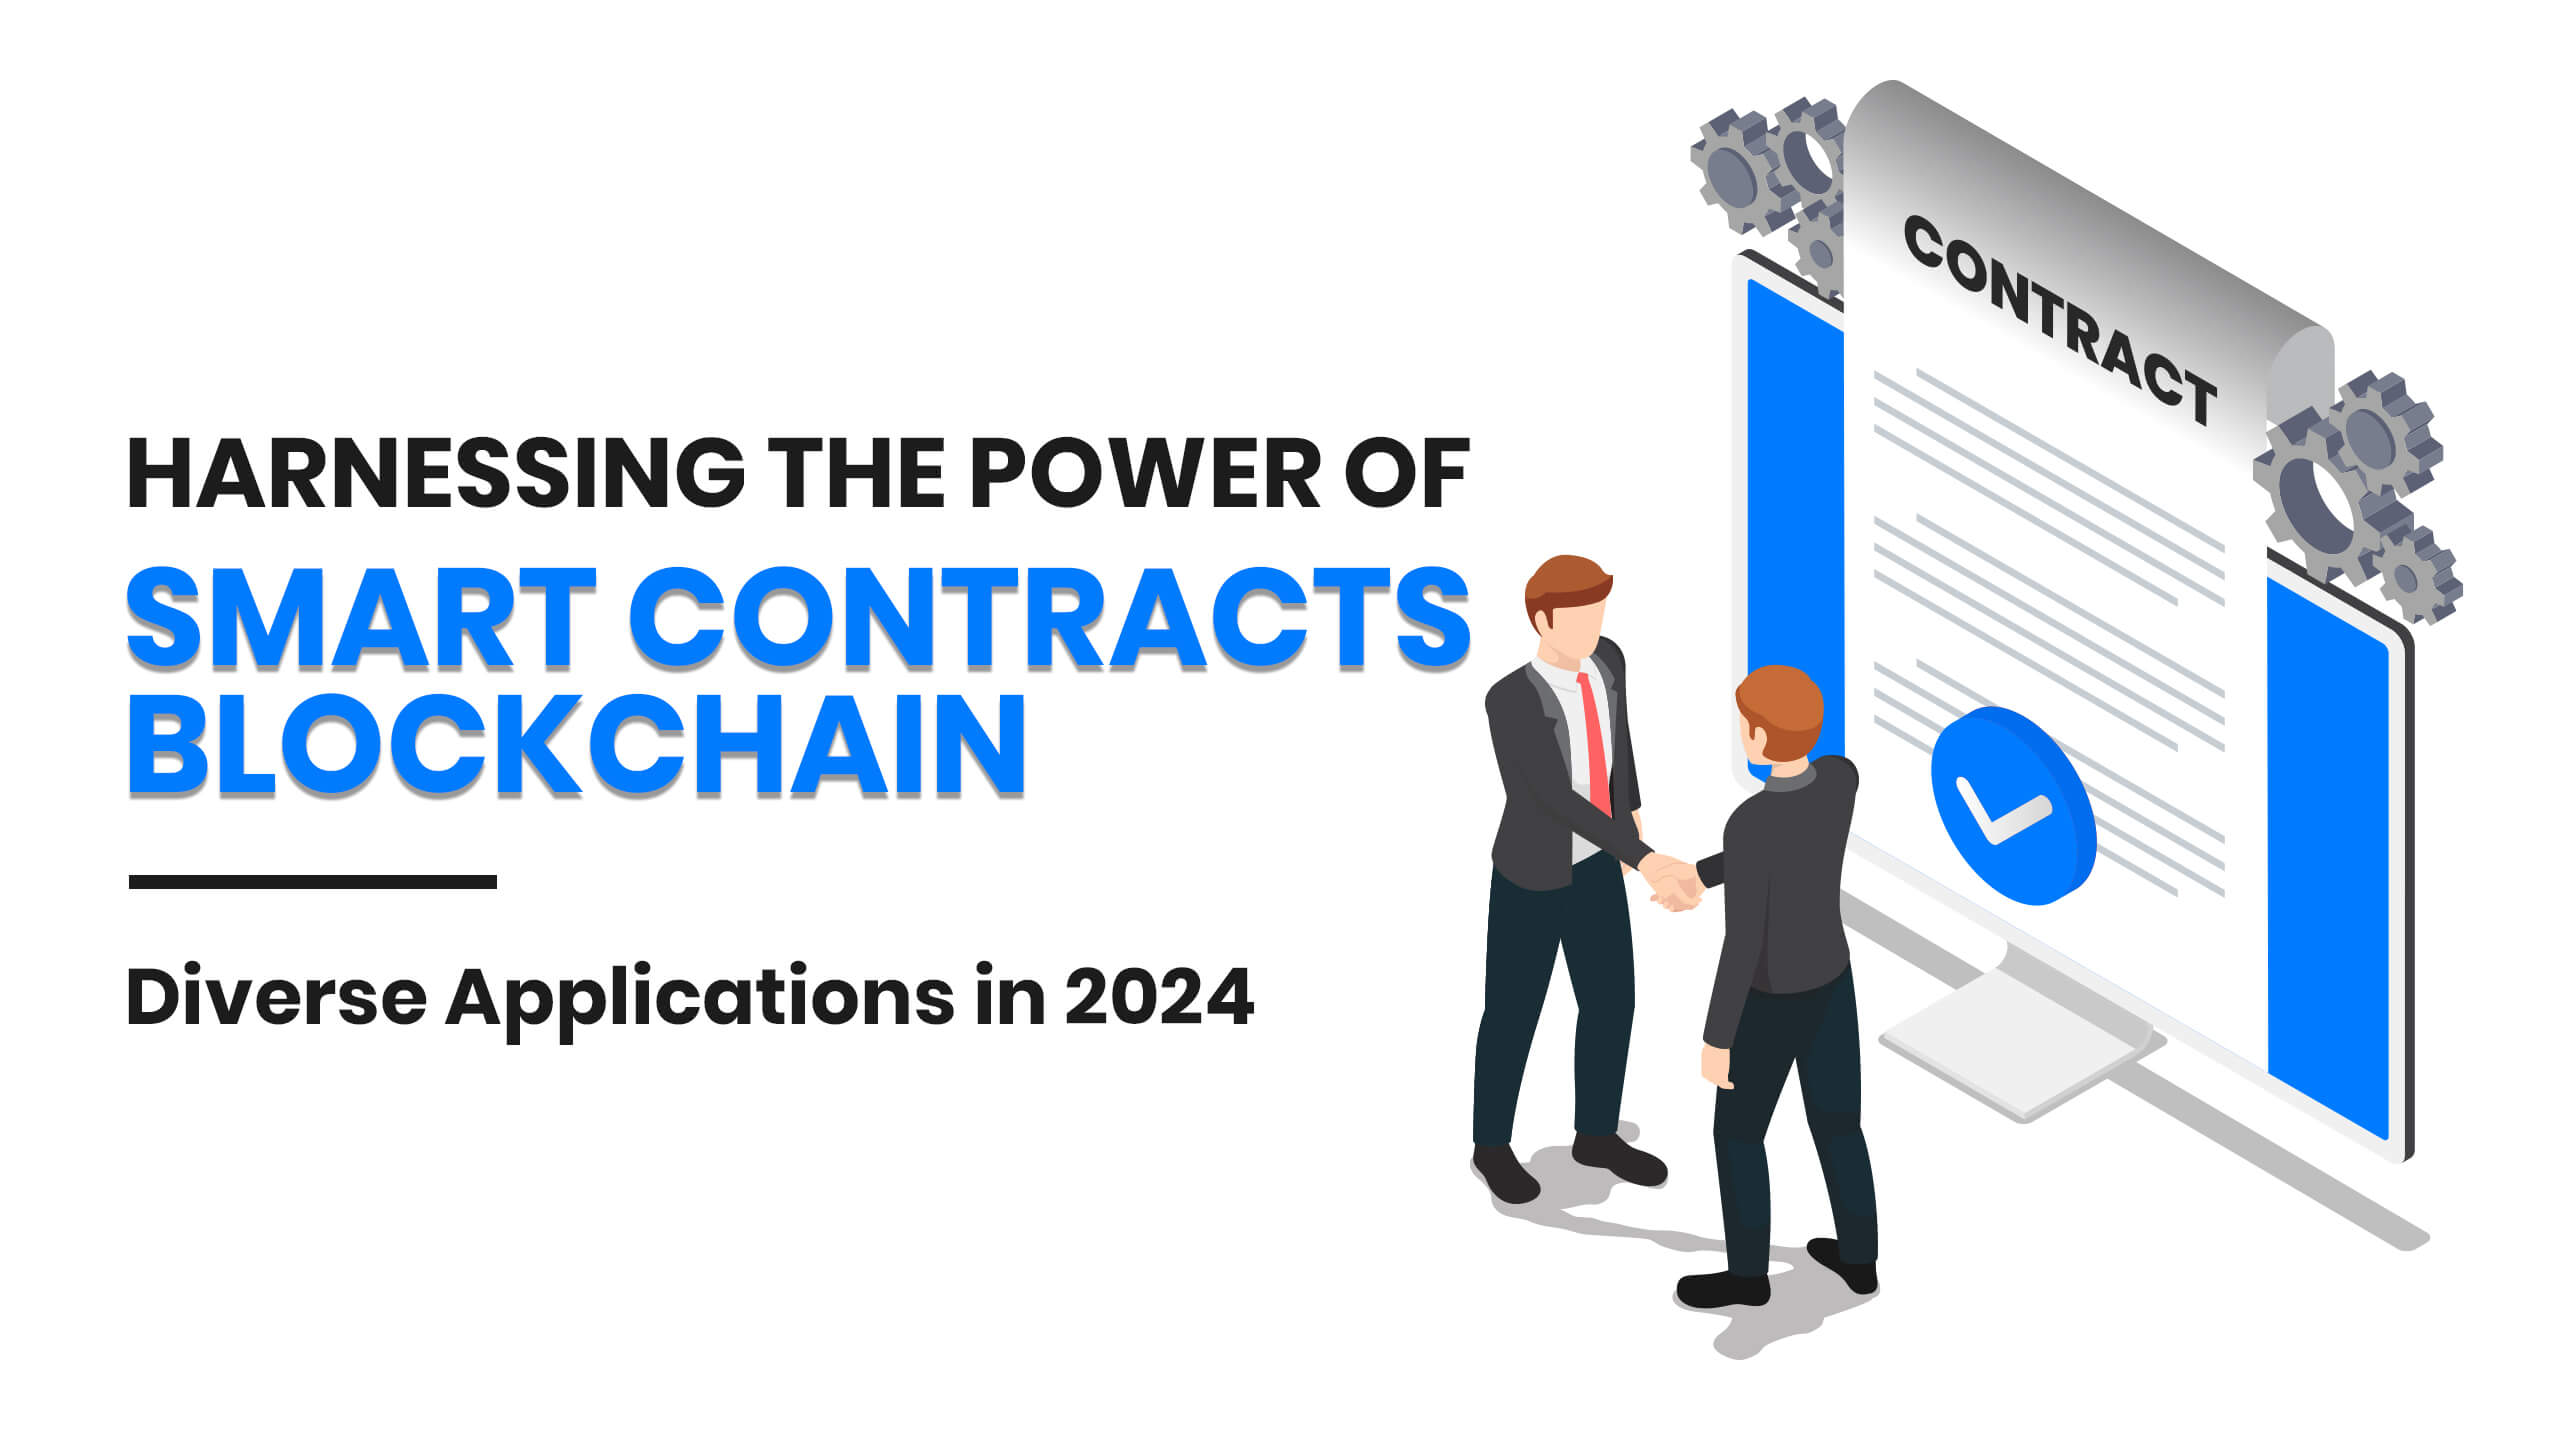 Harnessing the Power of Smart Contracts Blockchain